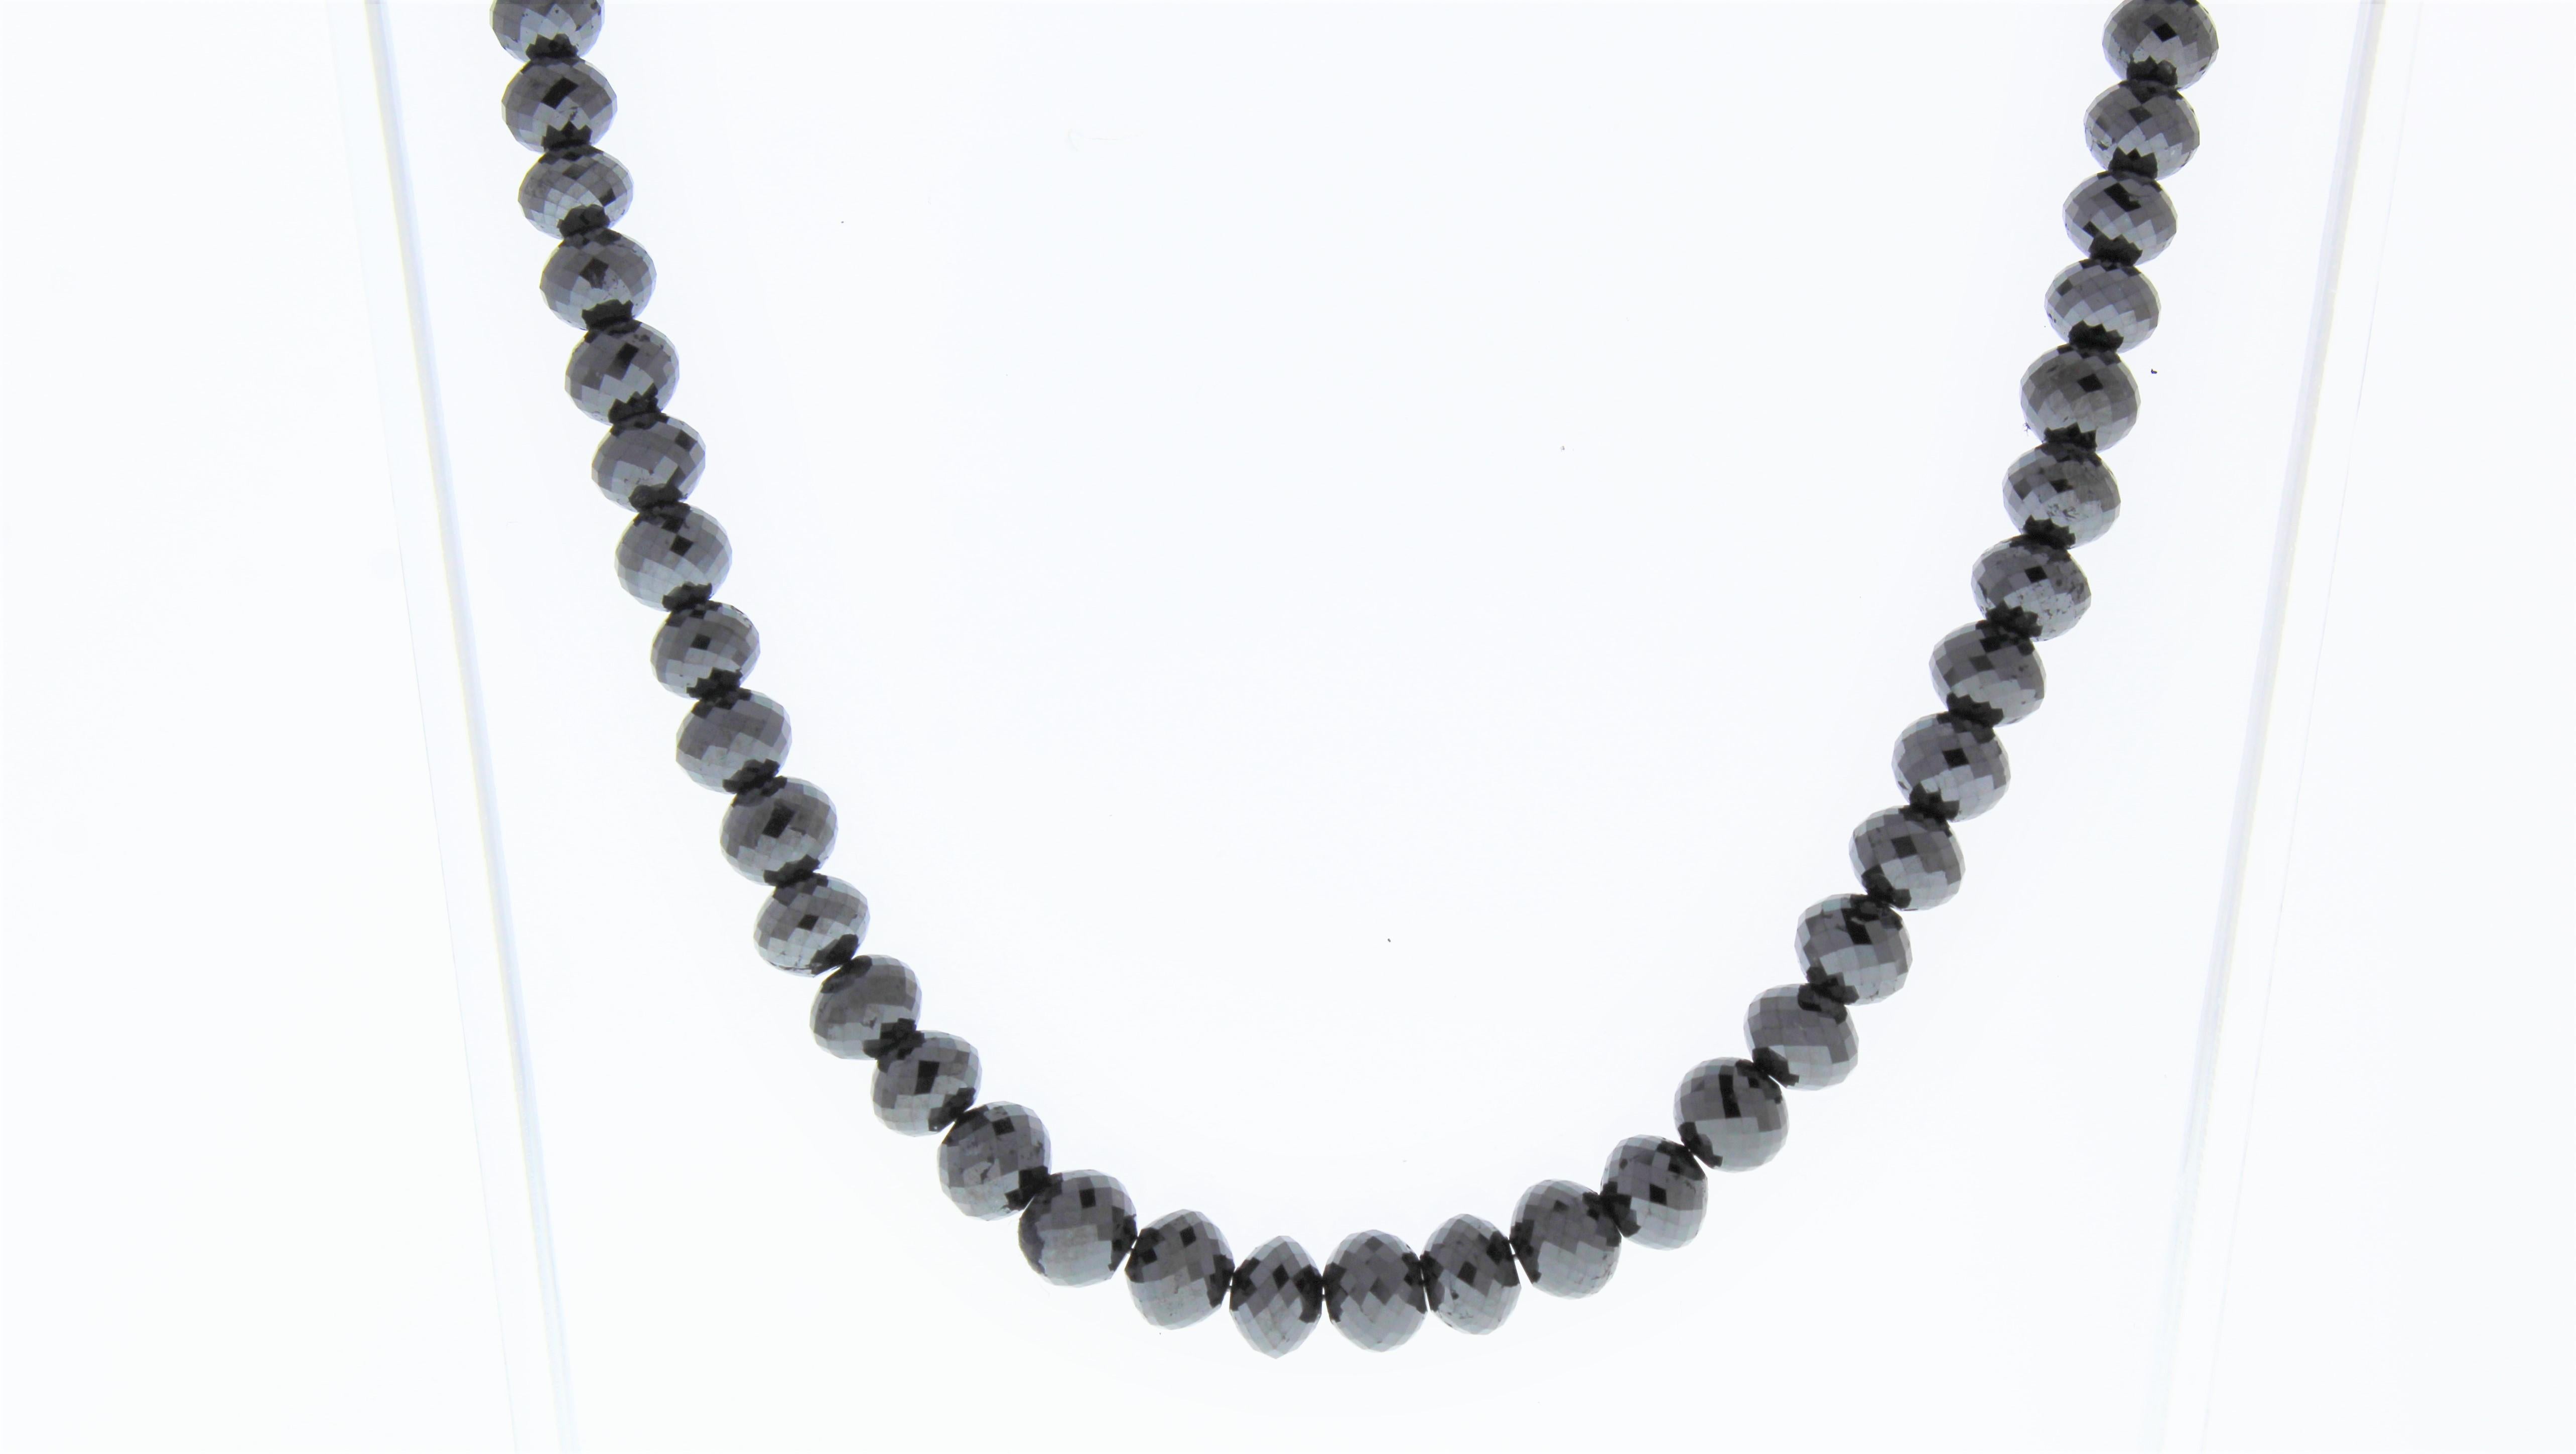 This necklace is a dramatic strand of 107 faceted briolette black diamonds totaling 101.66 carats. Slim in design and perfect for layering alongside other necklaces and chains, this black diamond necklace is sure to get noticed.